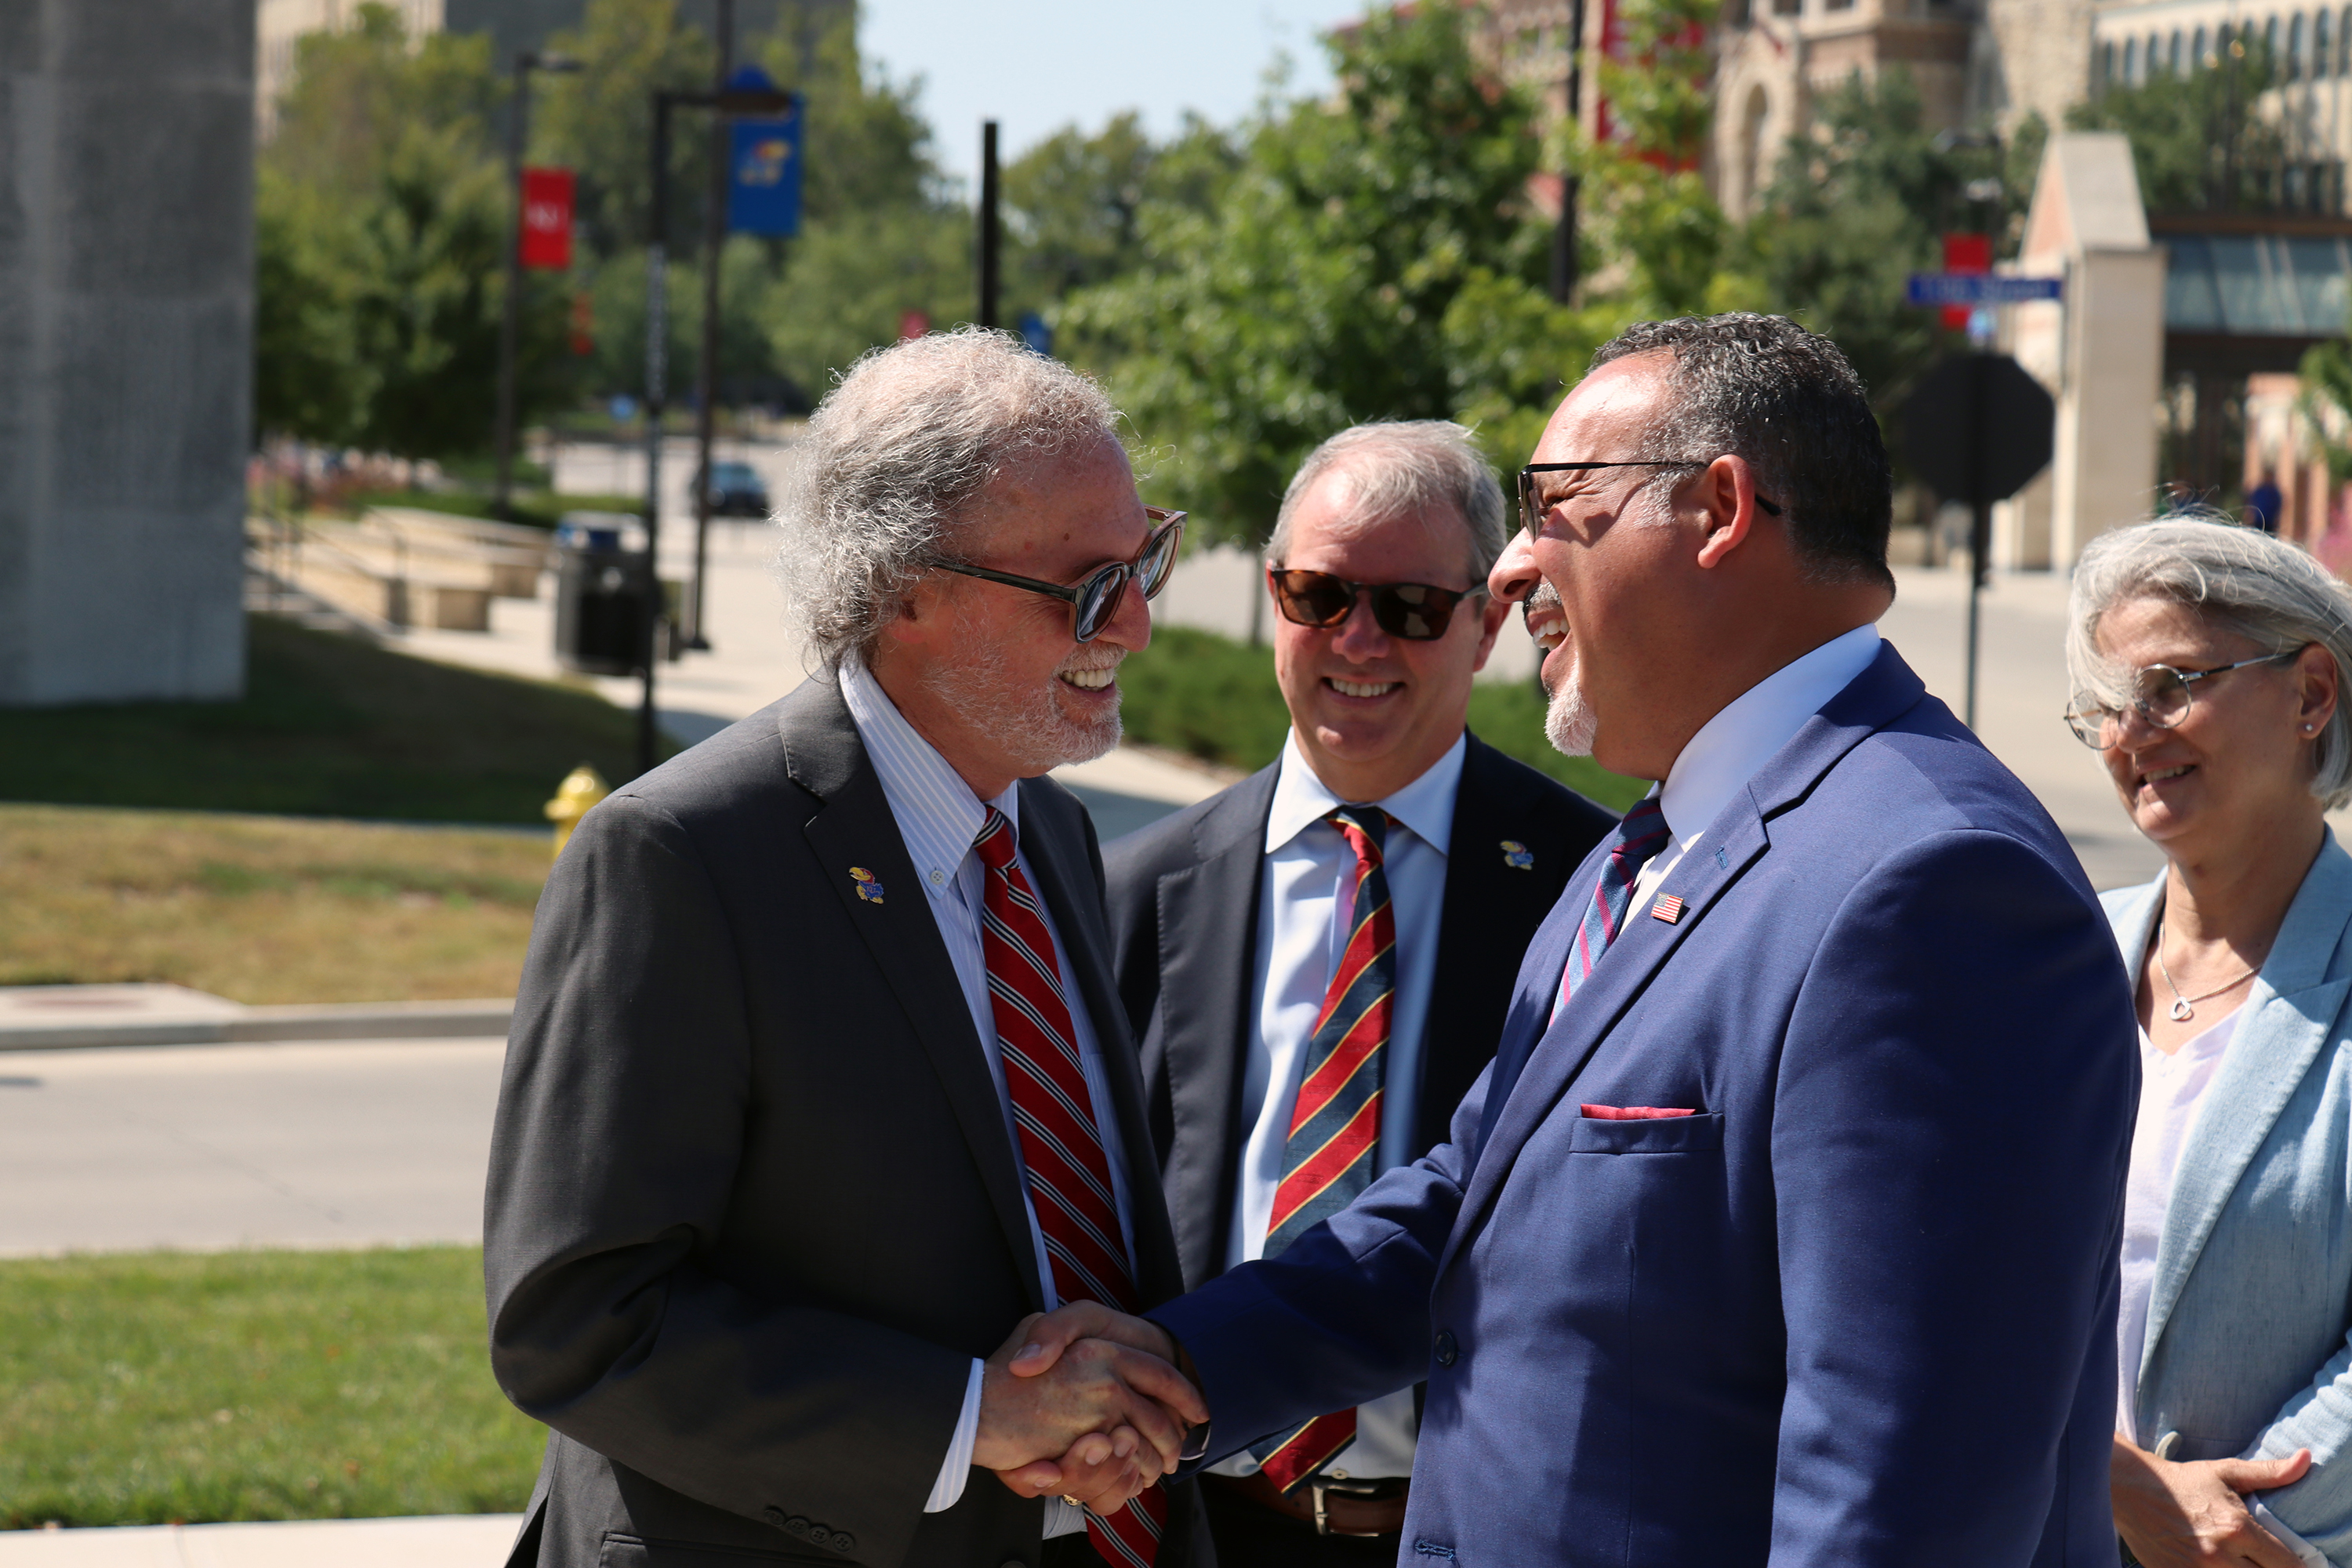 U.S. Secretary of Education Miguel Cardona and School of Education and Human Sciences Dean Rick Ginsberg shake hands, while KU Chancellor Doug Girod and Provost & Executive Vice Chancellor Barbara Bichelmeyer look on. 